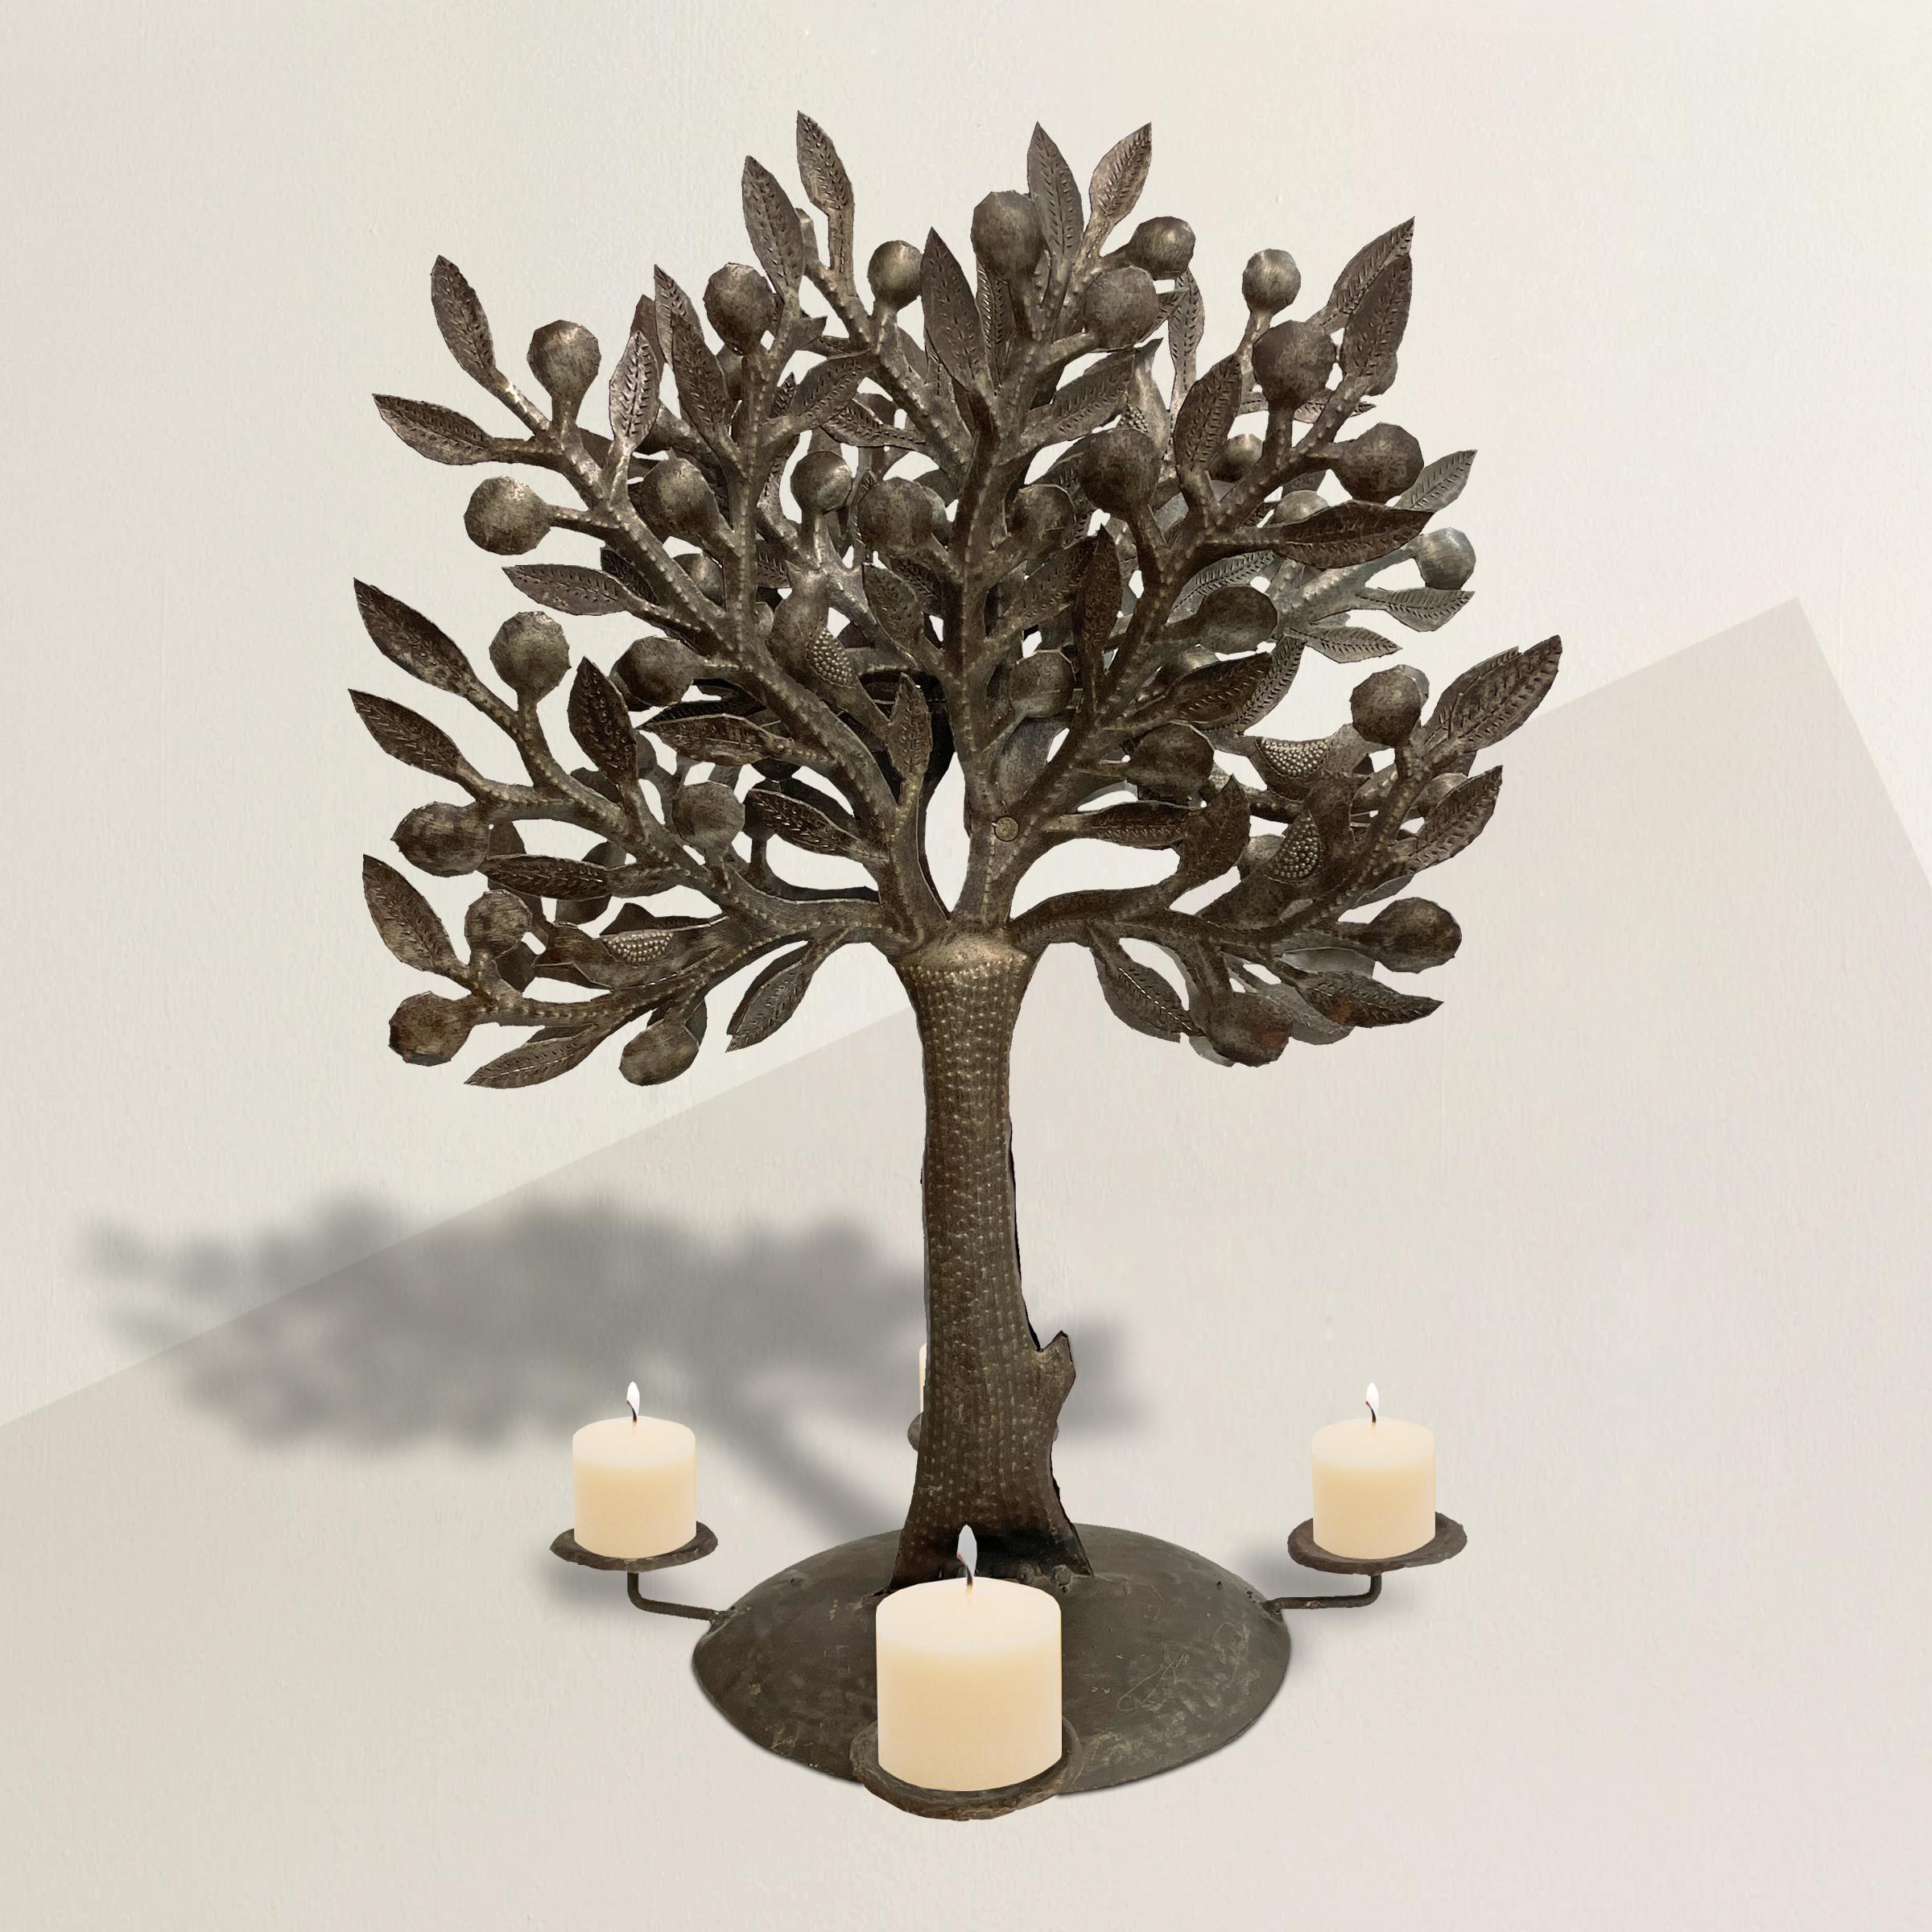 A whimsical Mexican tree-of-life candelabra constructed from several sheets of steel, hand-cut and punched with leaves, birds, and berries, and supported by a tree trunk that's surrounded by four candle cups.